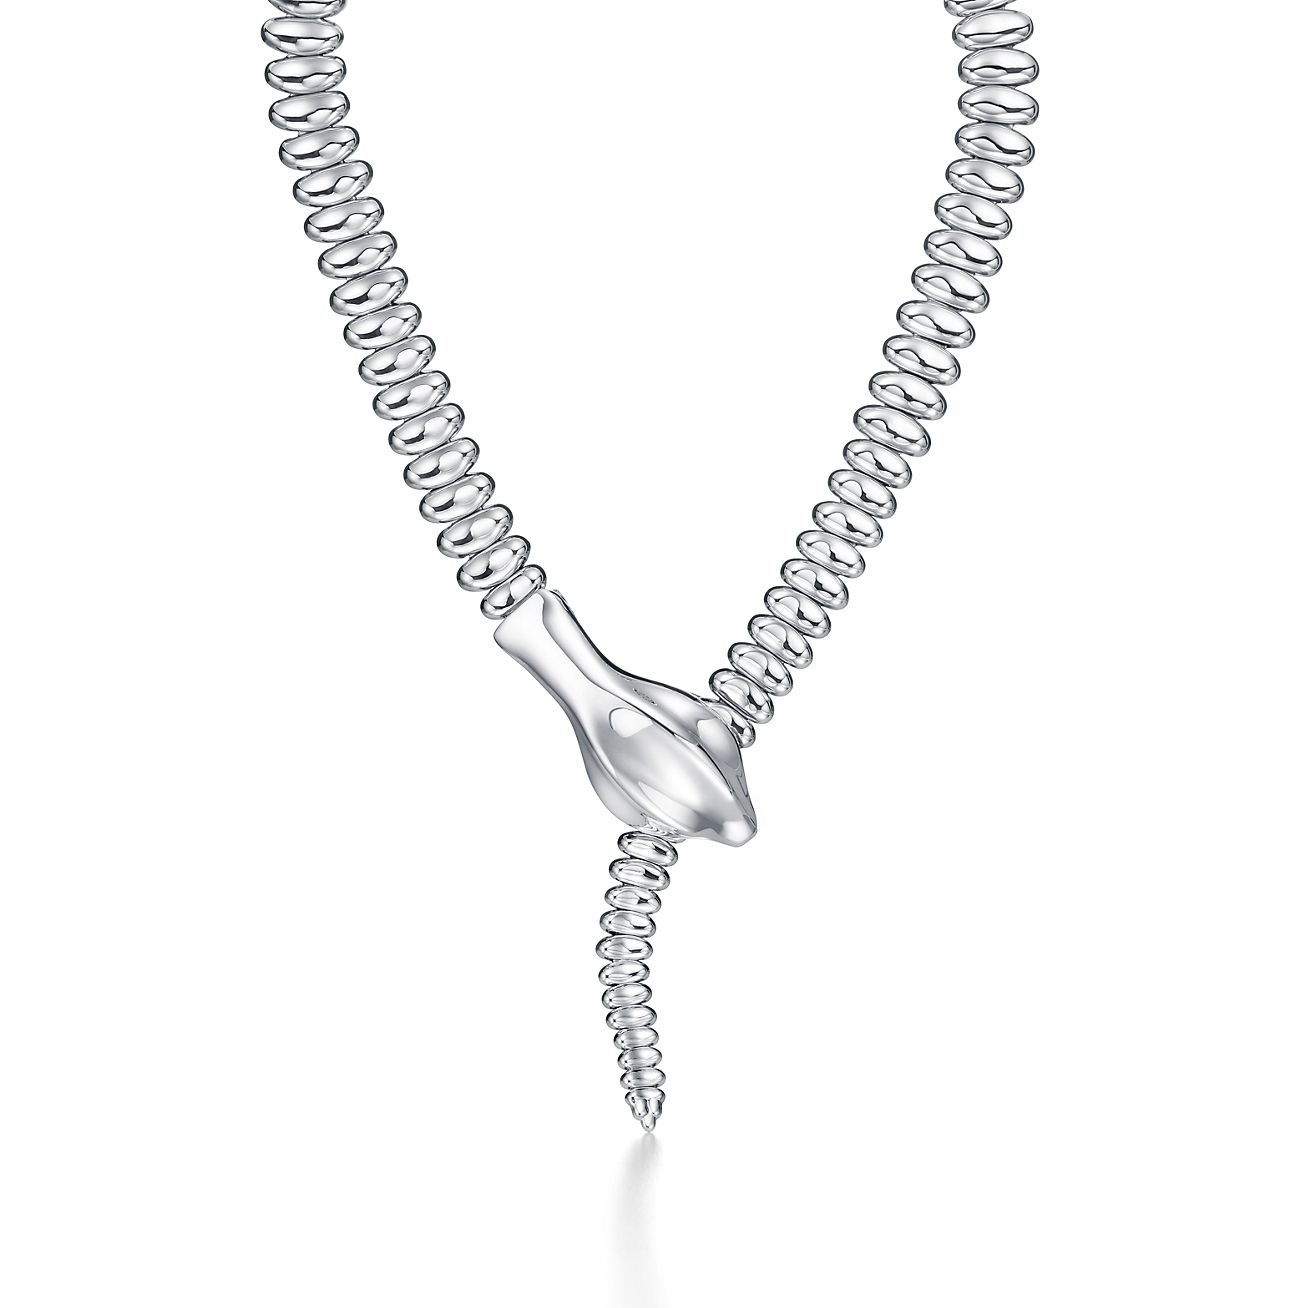 5 Silver Snake Chain Necklaces You Will Love